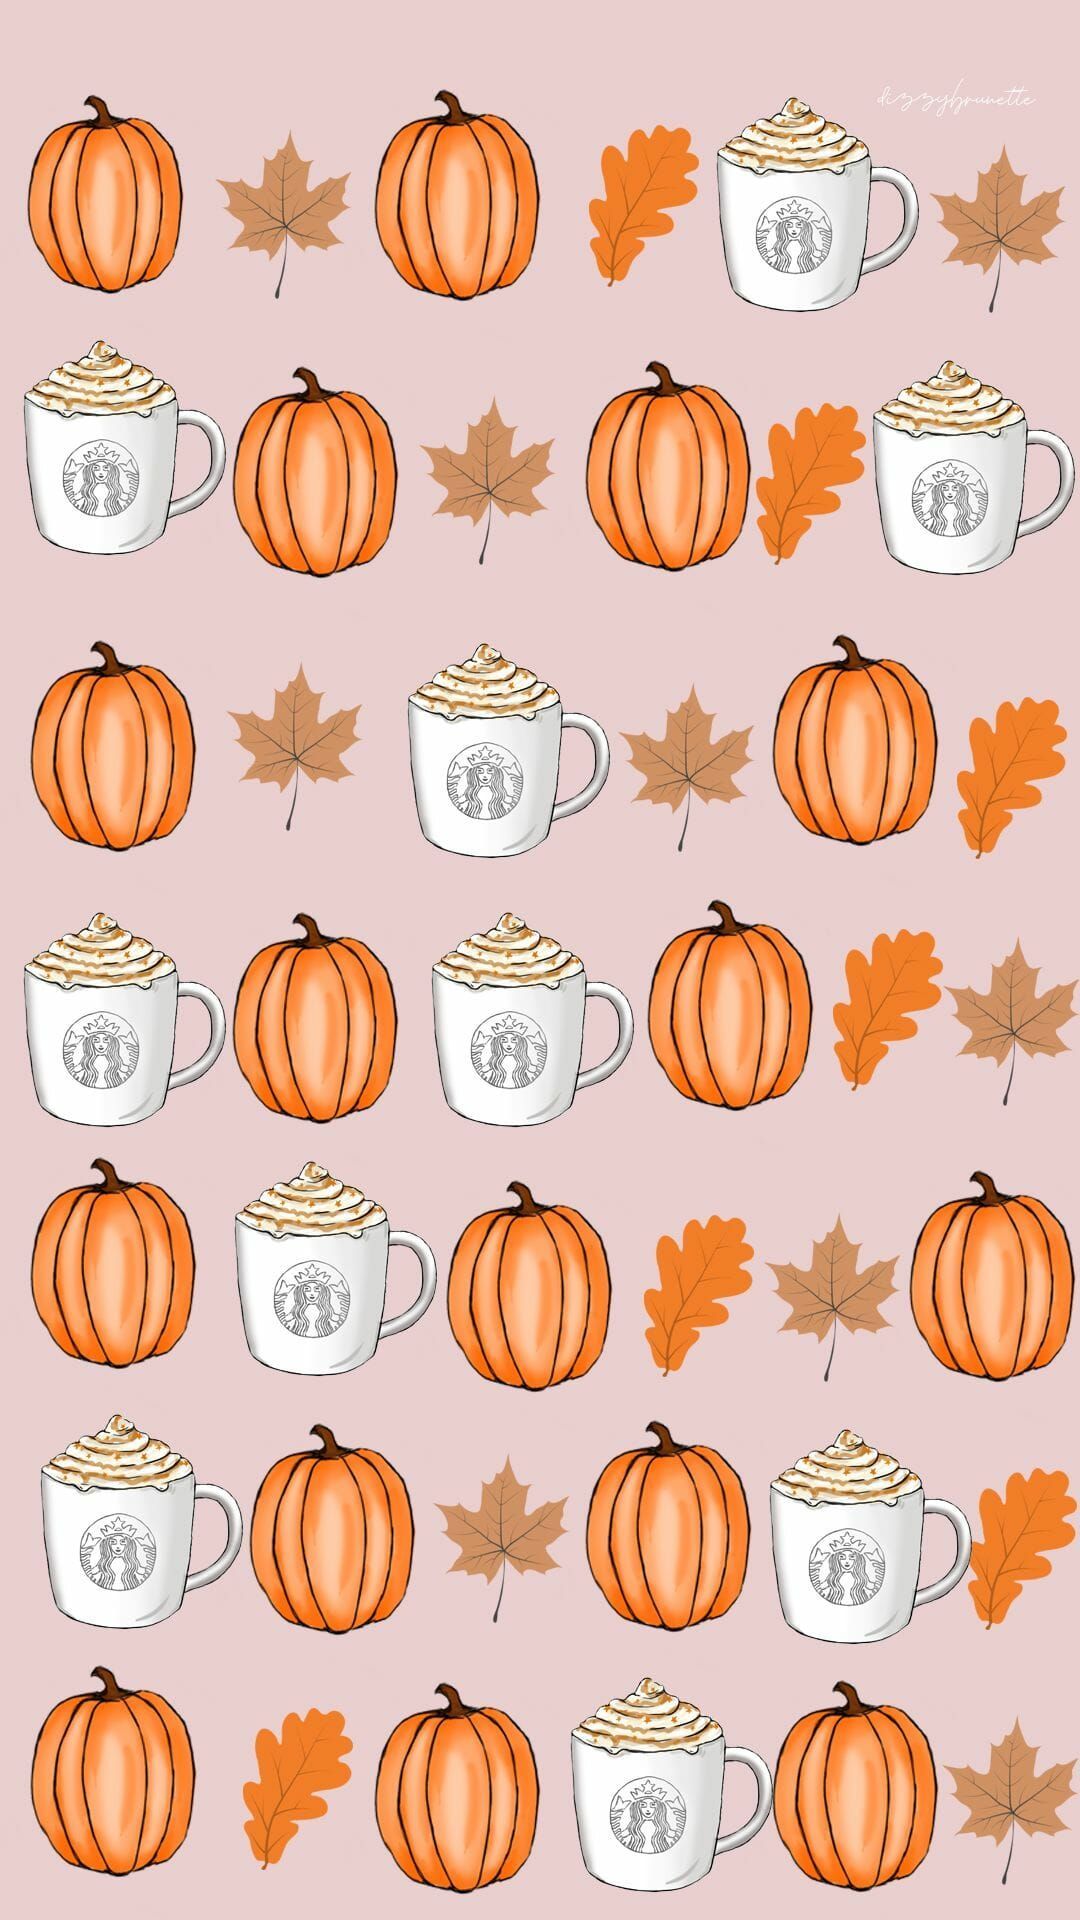 Free Amazing Fall Wallpaper For iPhone. Thanksgiving iphone wallpaper, iPhone wallpaper fall, Fall wallpaper